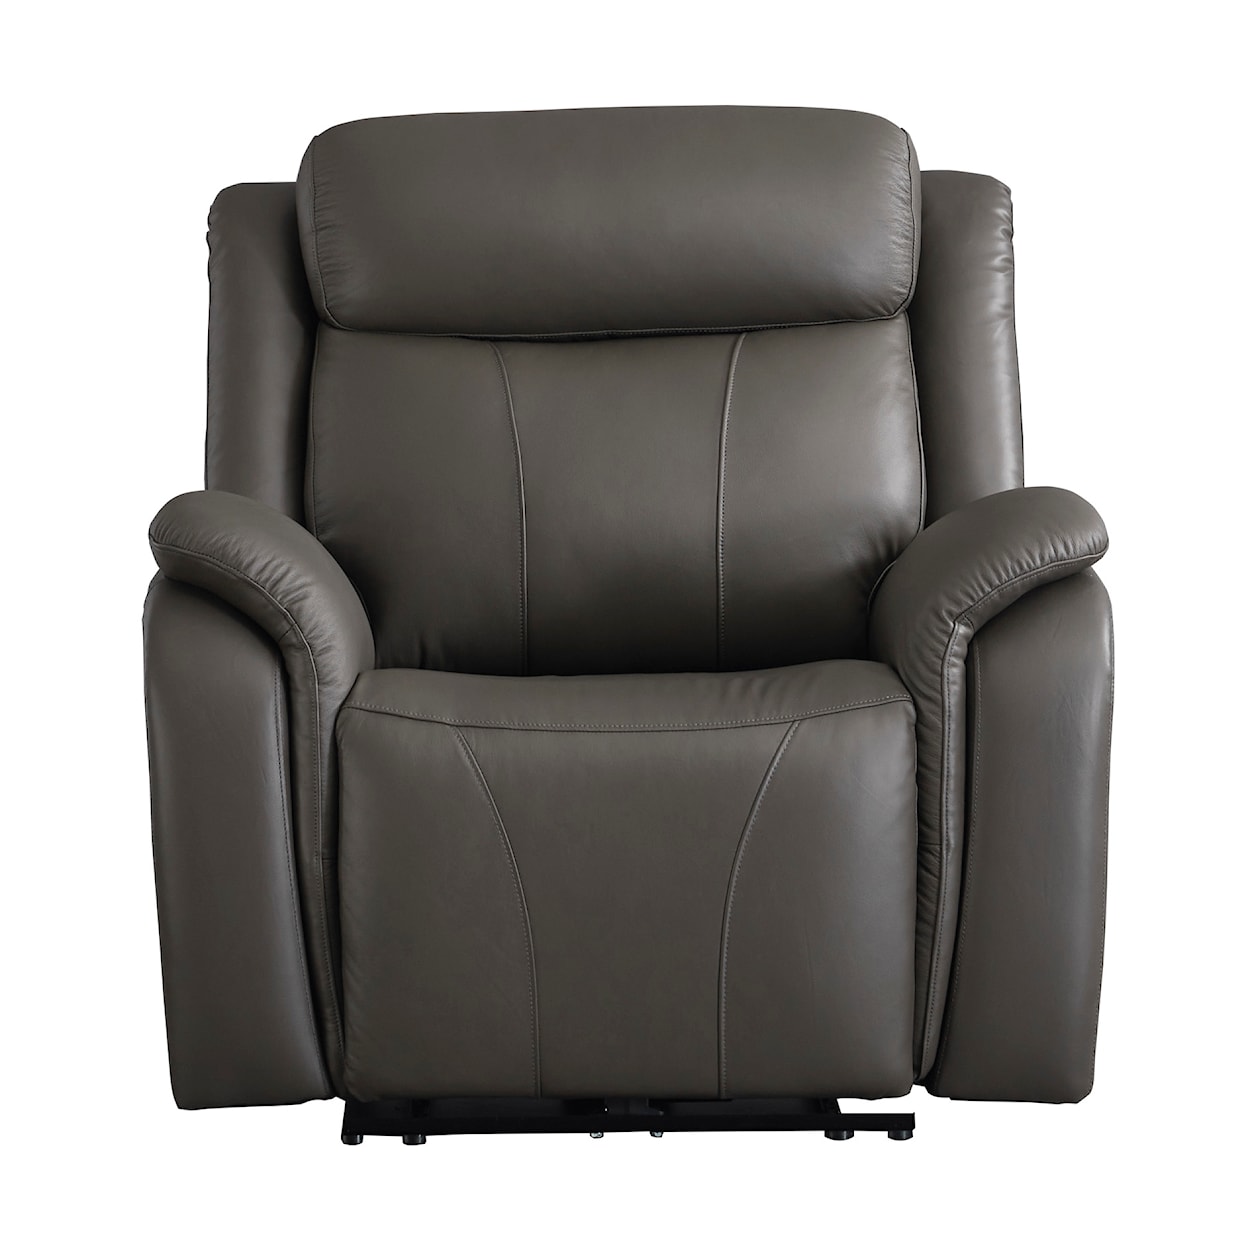 Signature Design by Ashley Chasewood Power Recliner